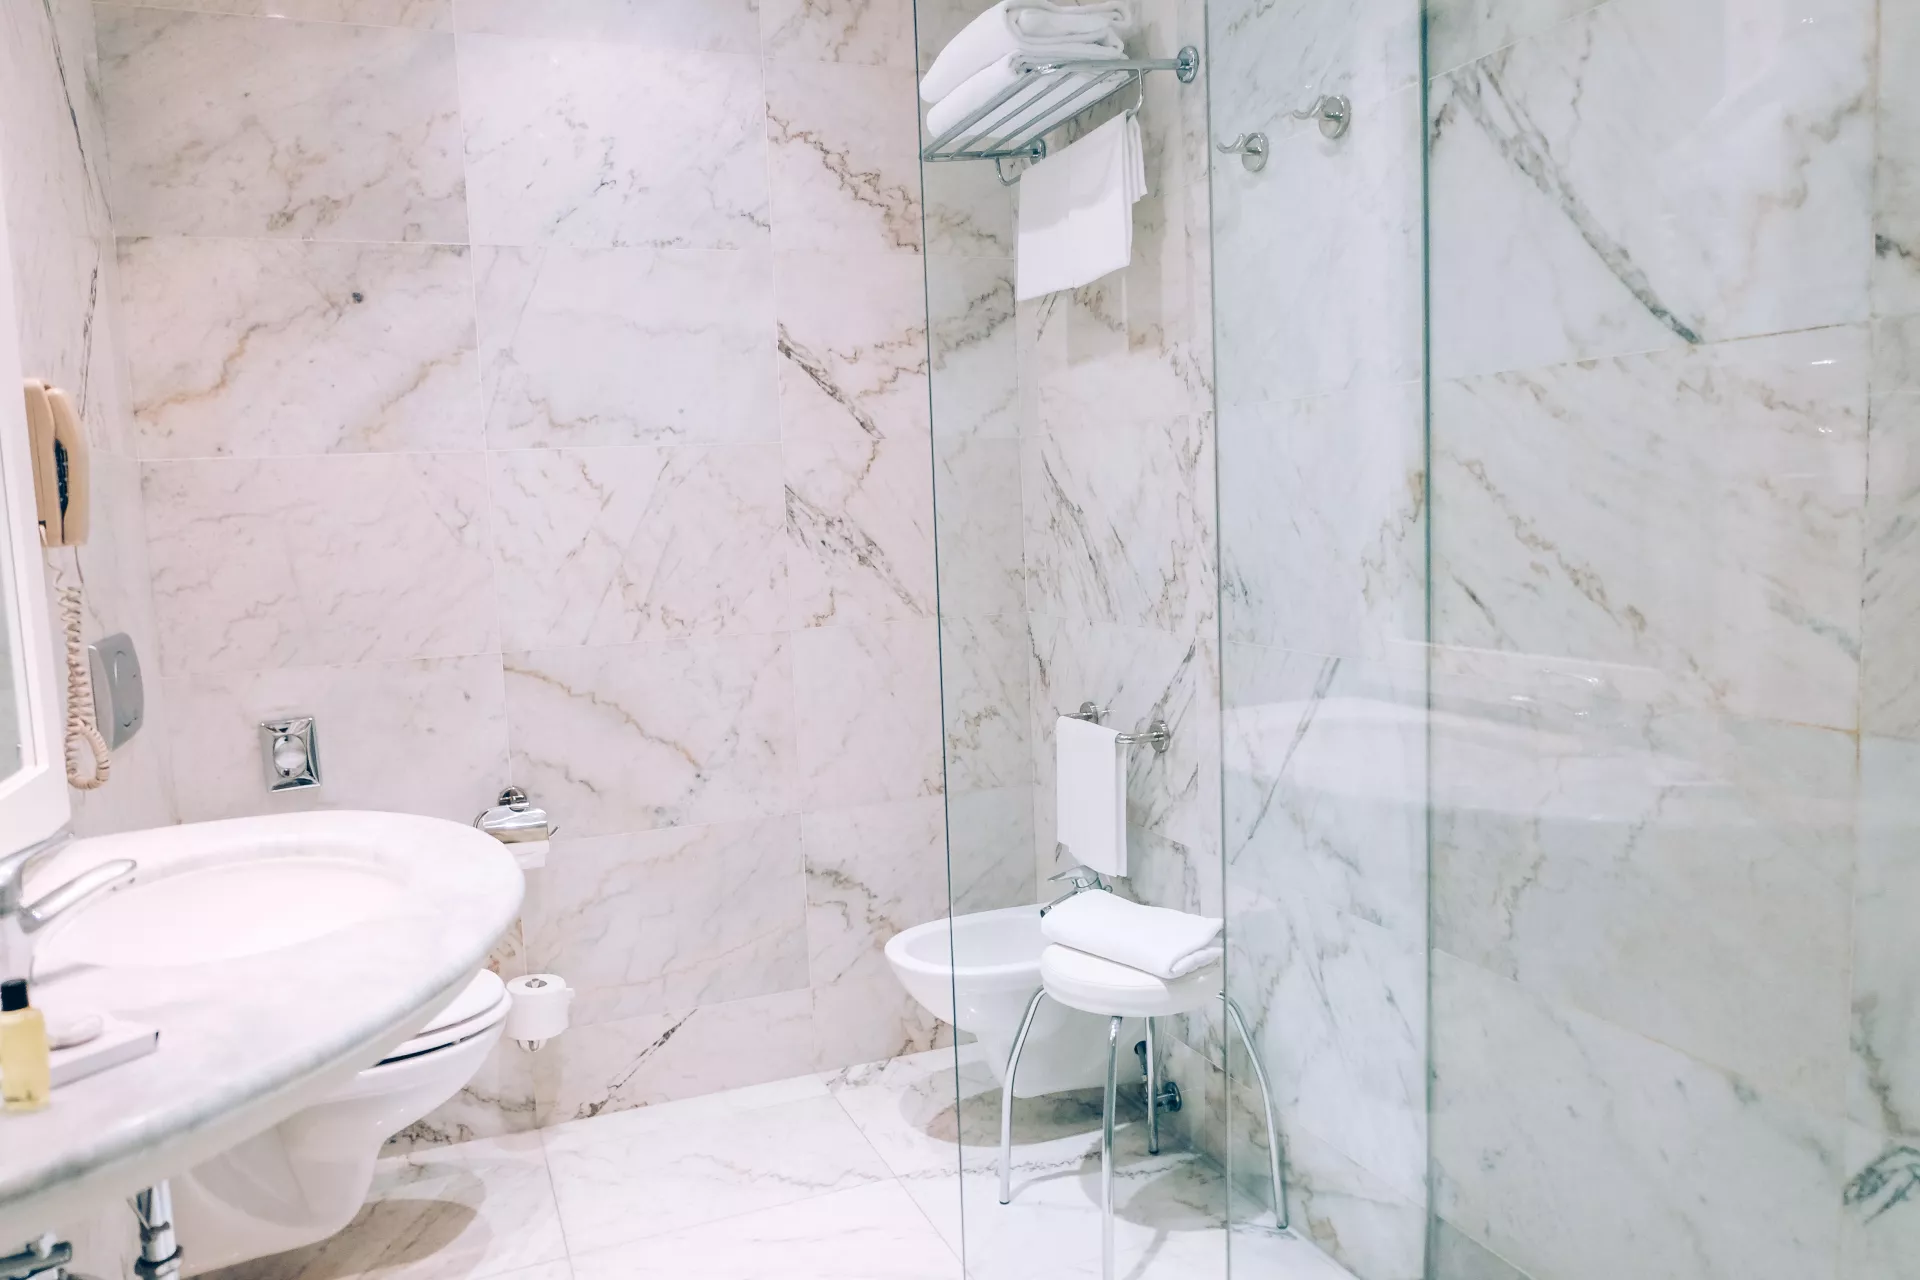 Bathroom decorated with marble tiles